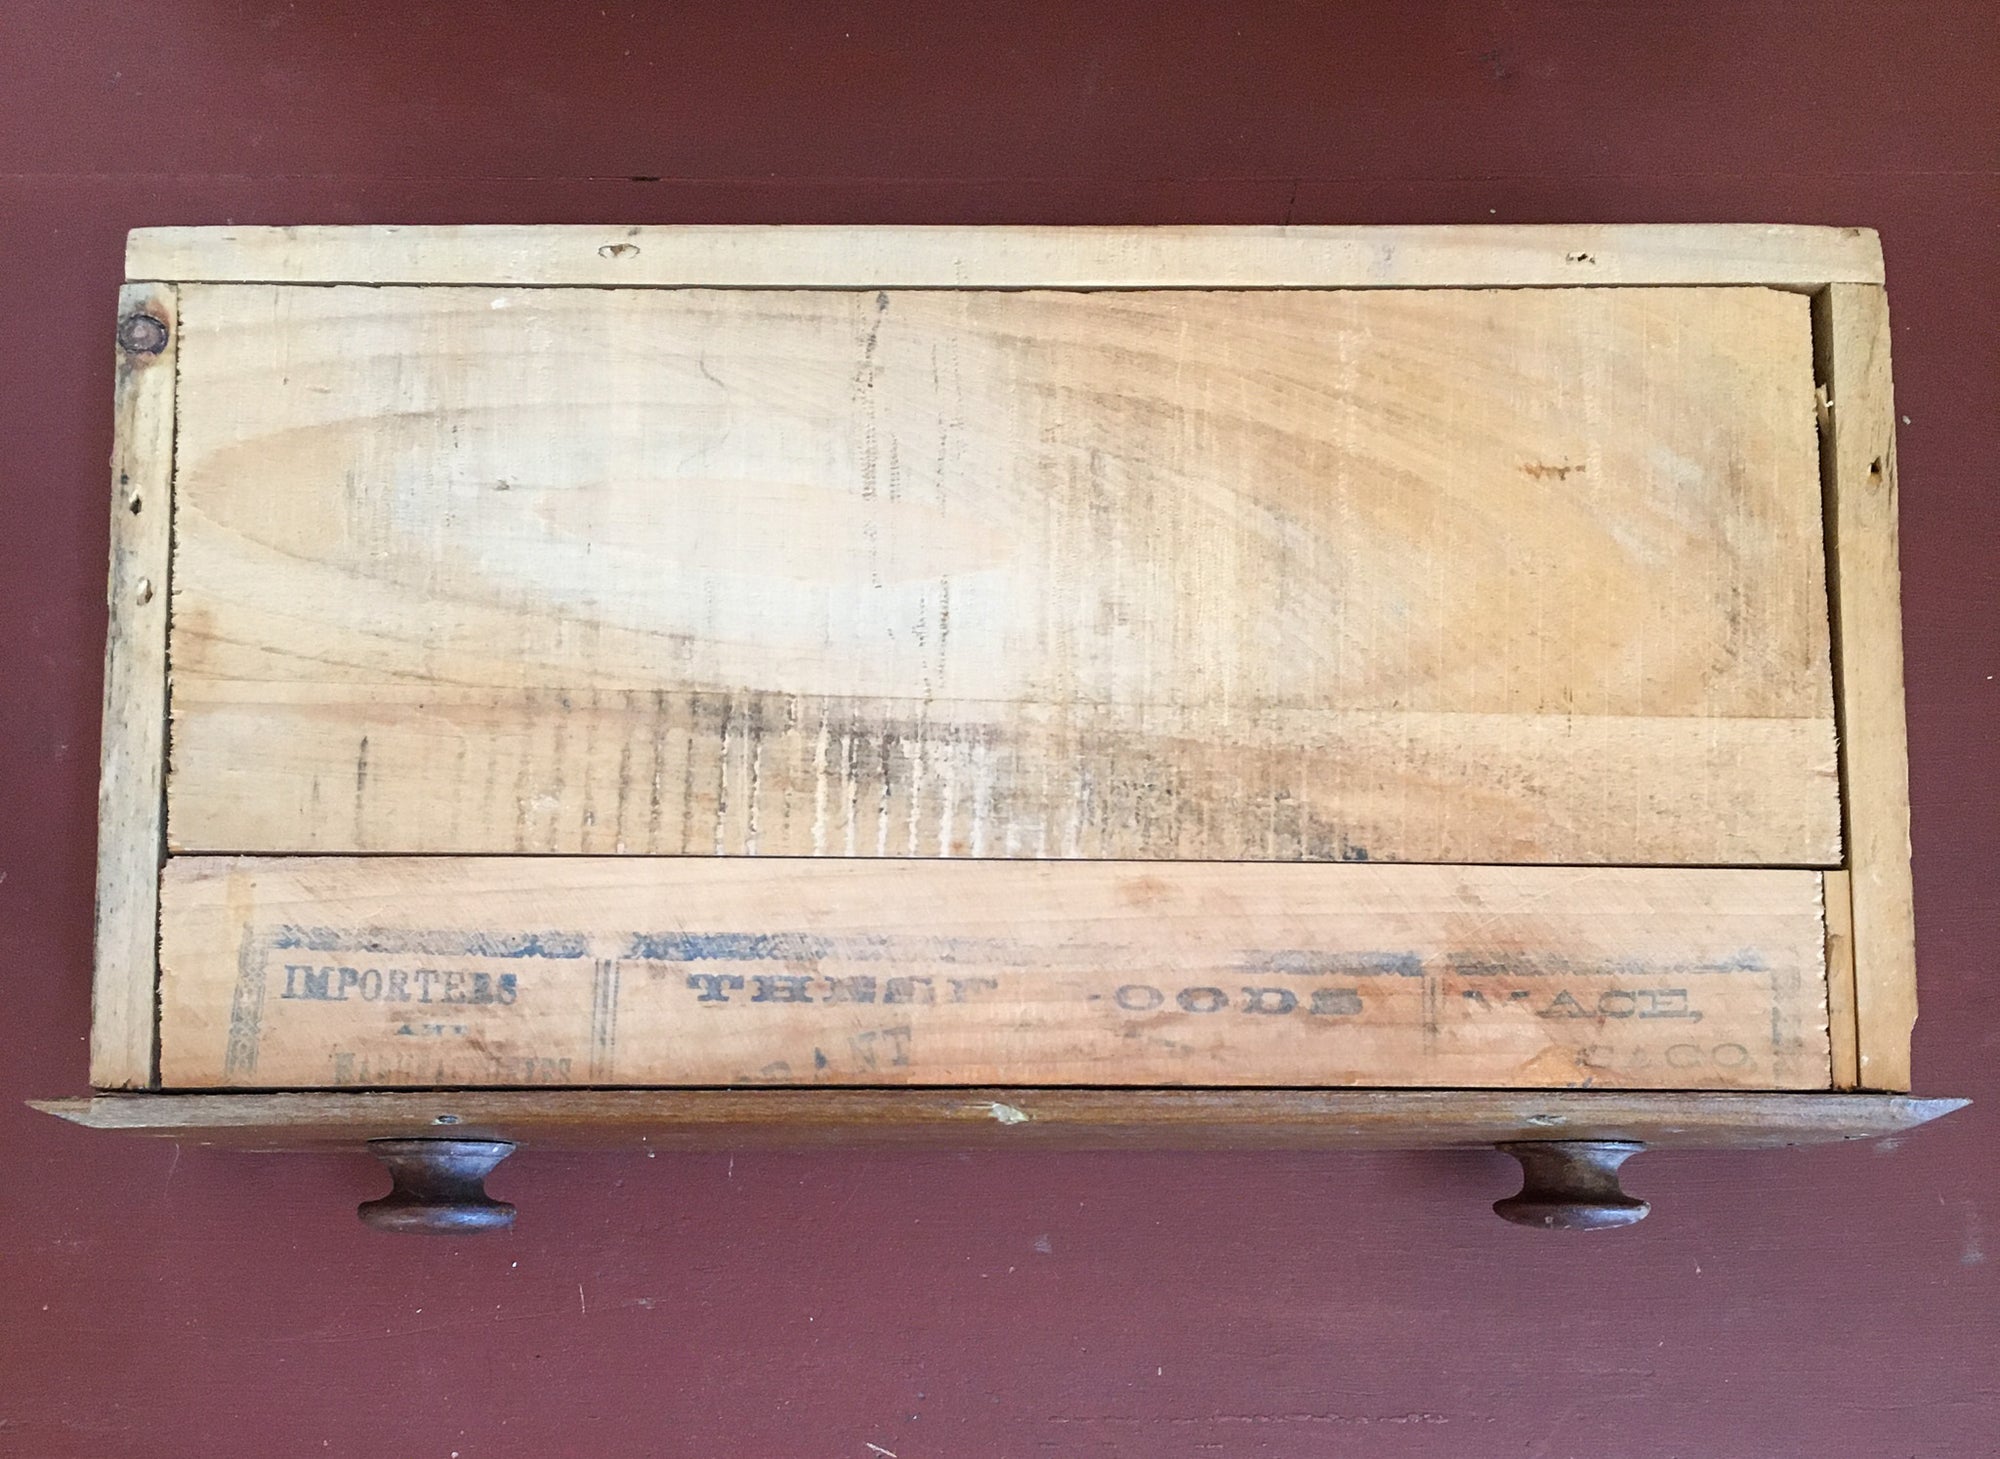 Late 1800’s – Early 1900’s Hand Made Wooden Box with Drawer and Cubbies